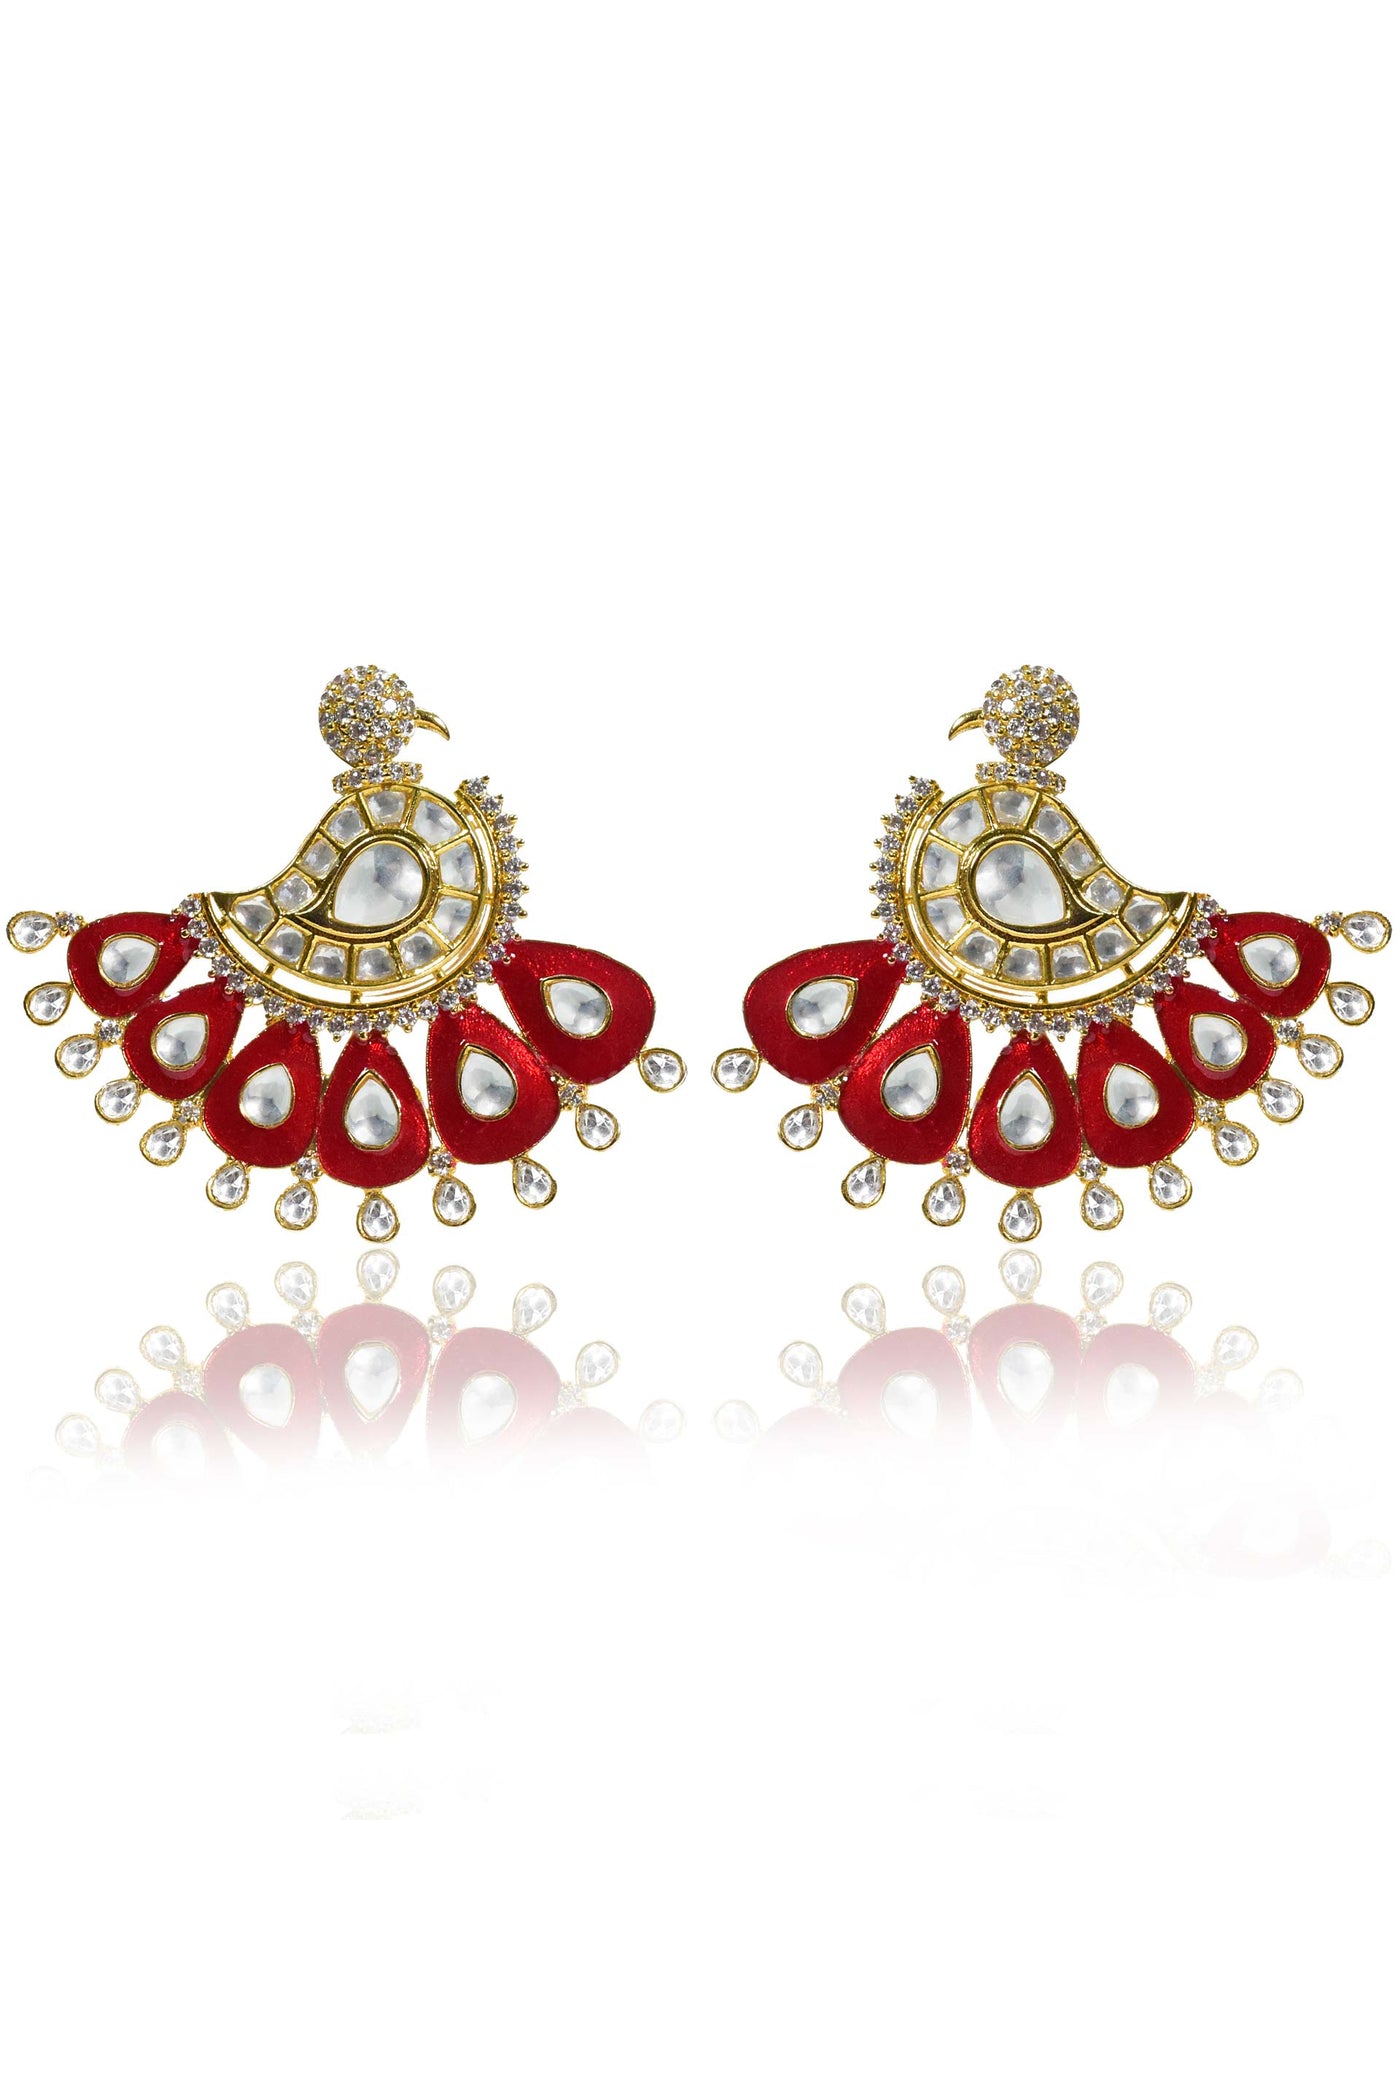 Tizora red peacock earrings red, gold and white fashion imitation jewellery indian designer wear online shopping melange singapore